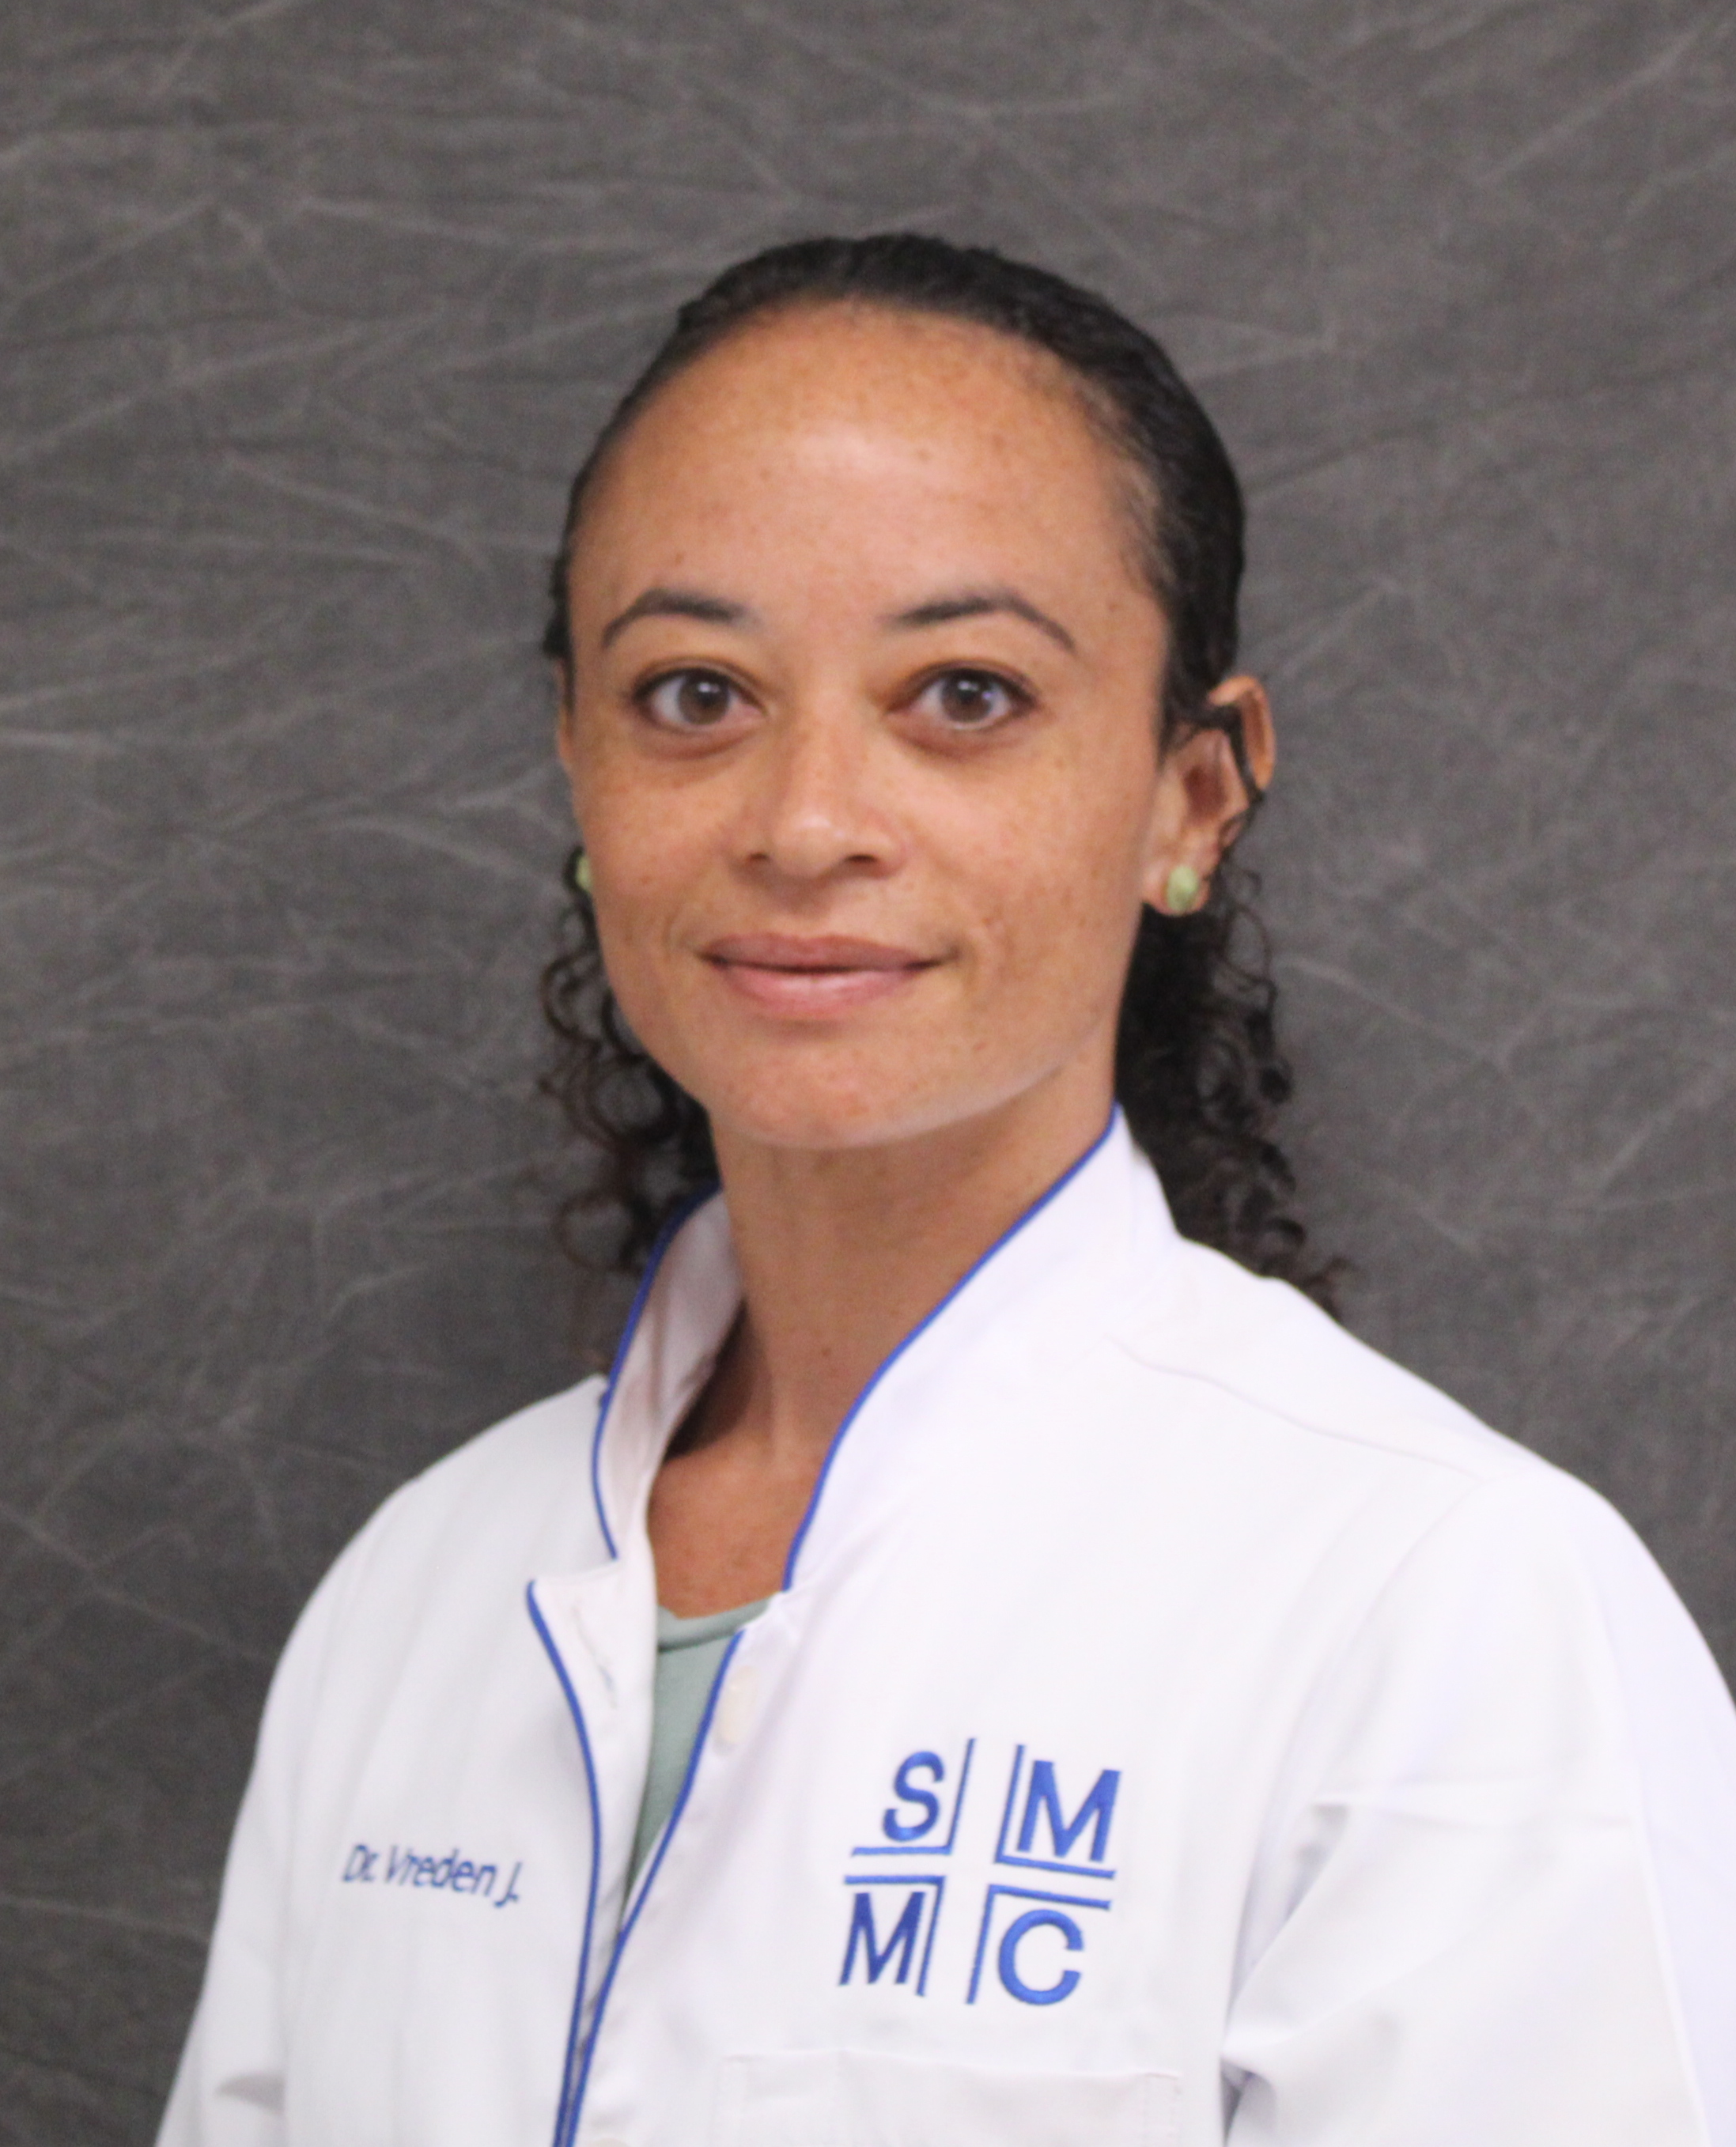 SMMC introduces new Anesthesiologist